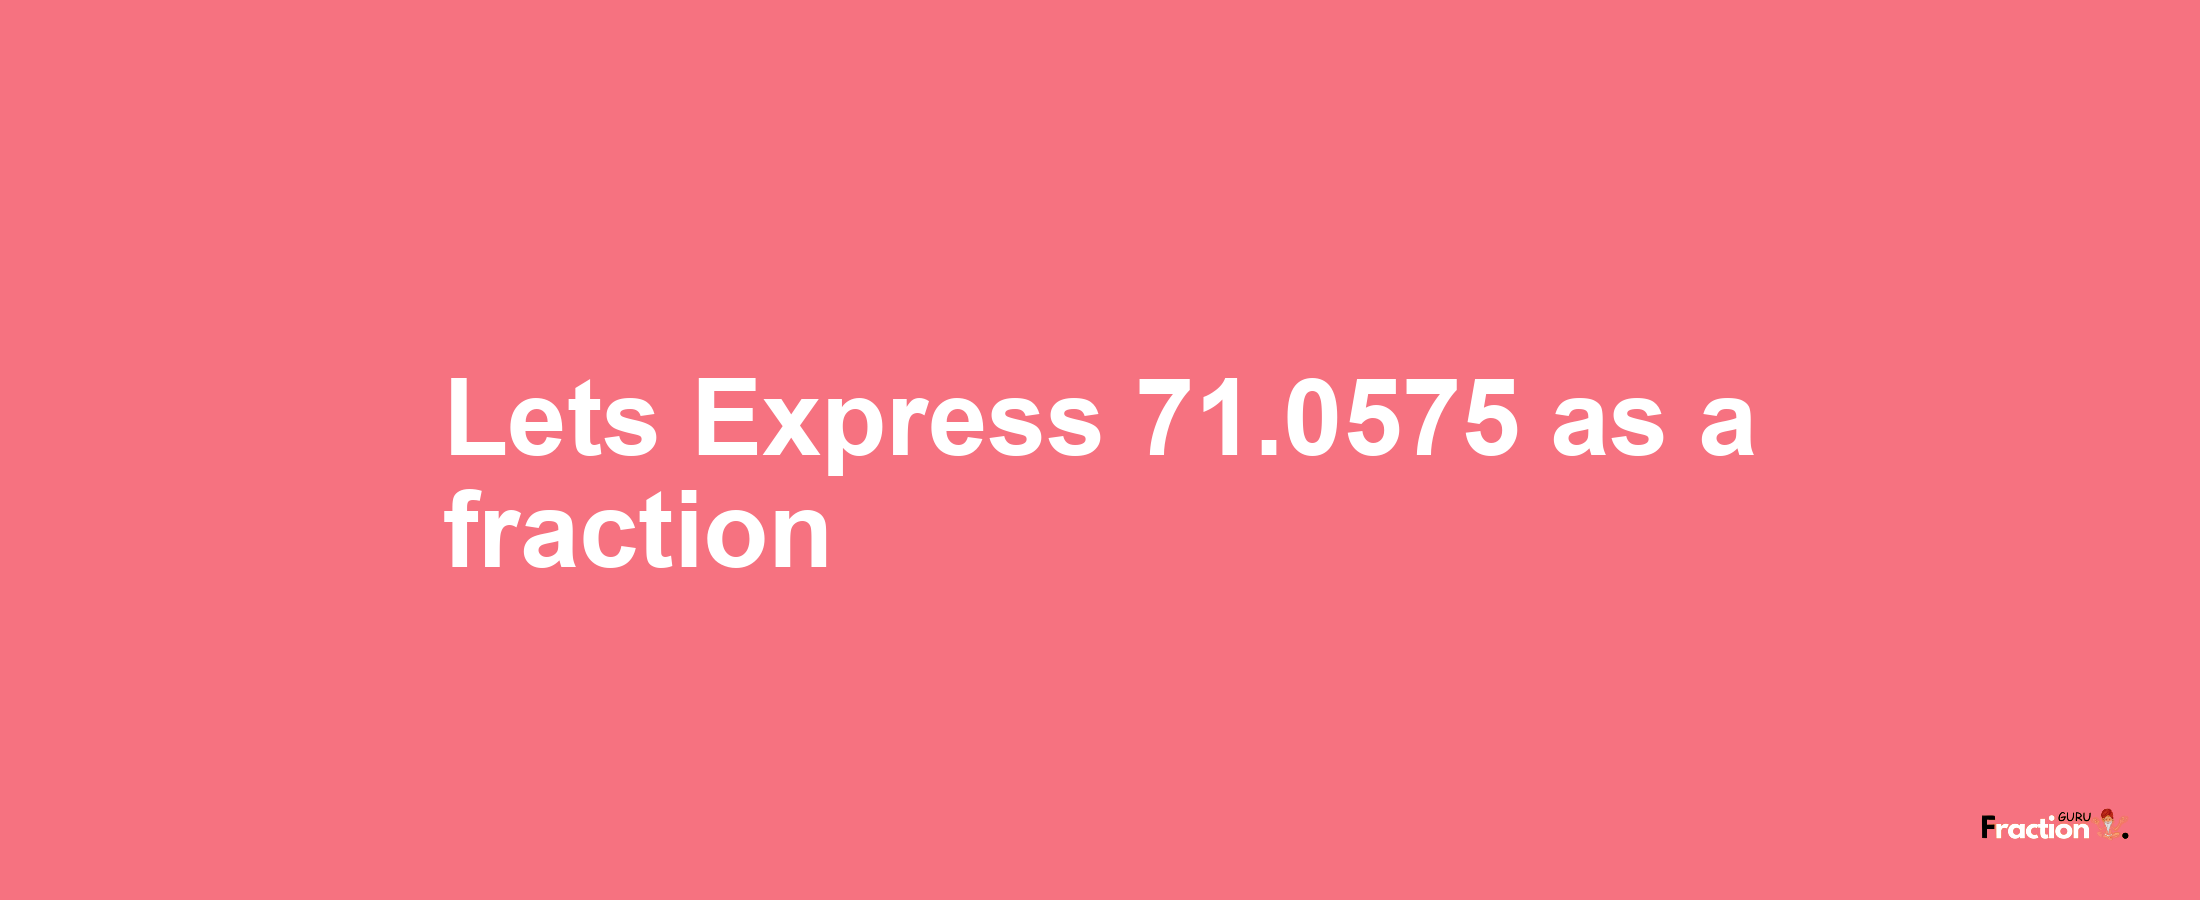 Lets Express 71.0575 as afraction